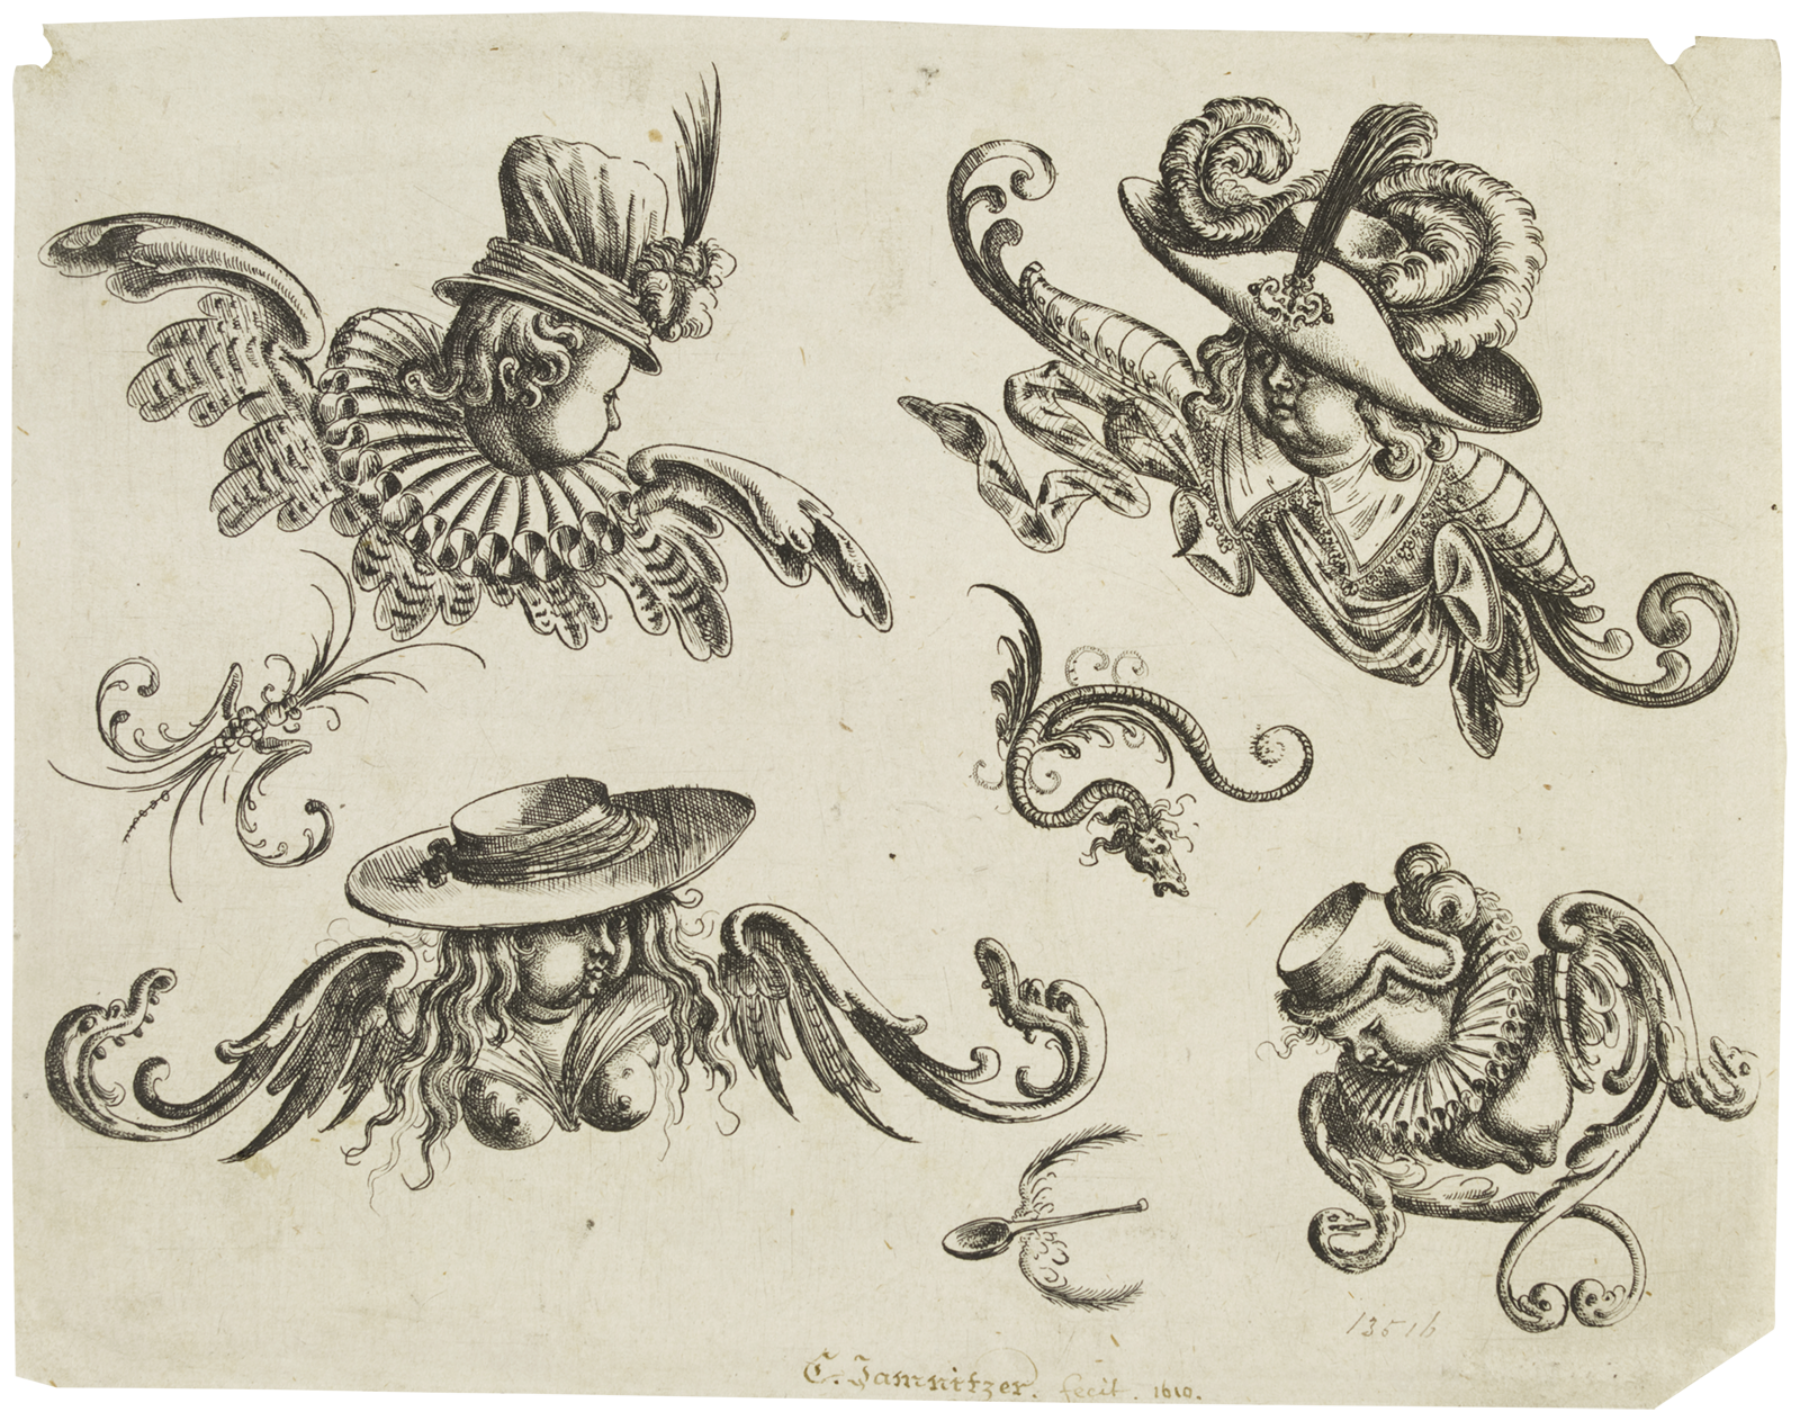 Christoph Jamnitzer, Das Neuw Grottesken Buch (The New Book of Grotesques), 1573–1610. Etching, 5 5/8 x 7 1/4 inches (14.3 x 18.3 cm) Victoria and Albert Museum, London, Ⓒ Victoria and Albert Museum, London.